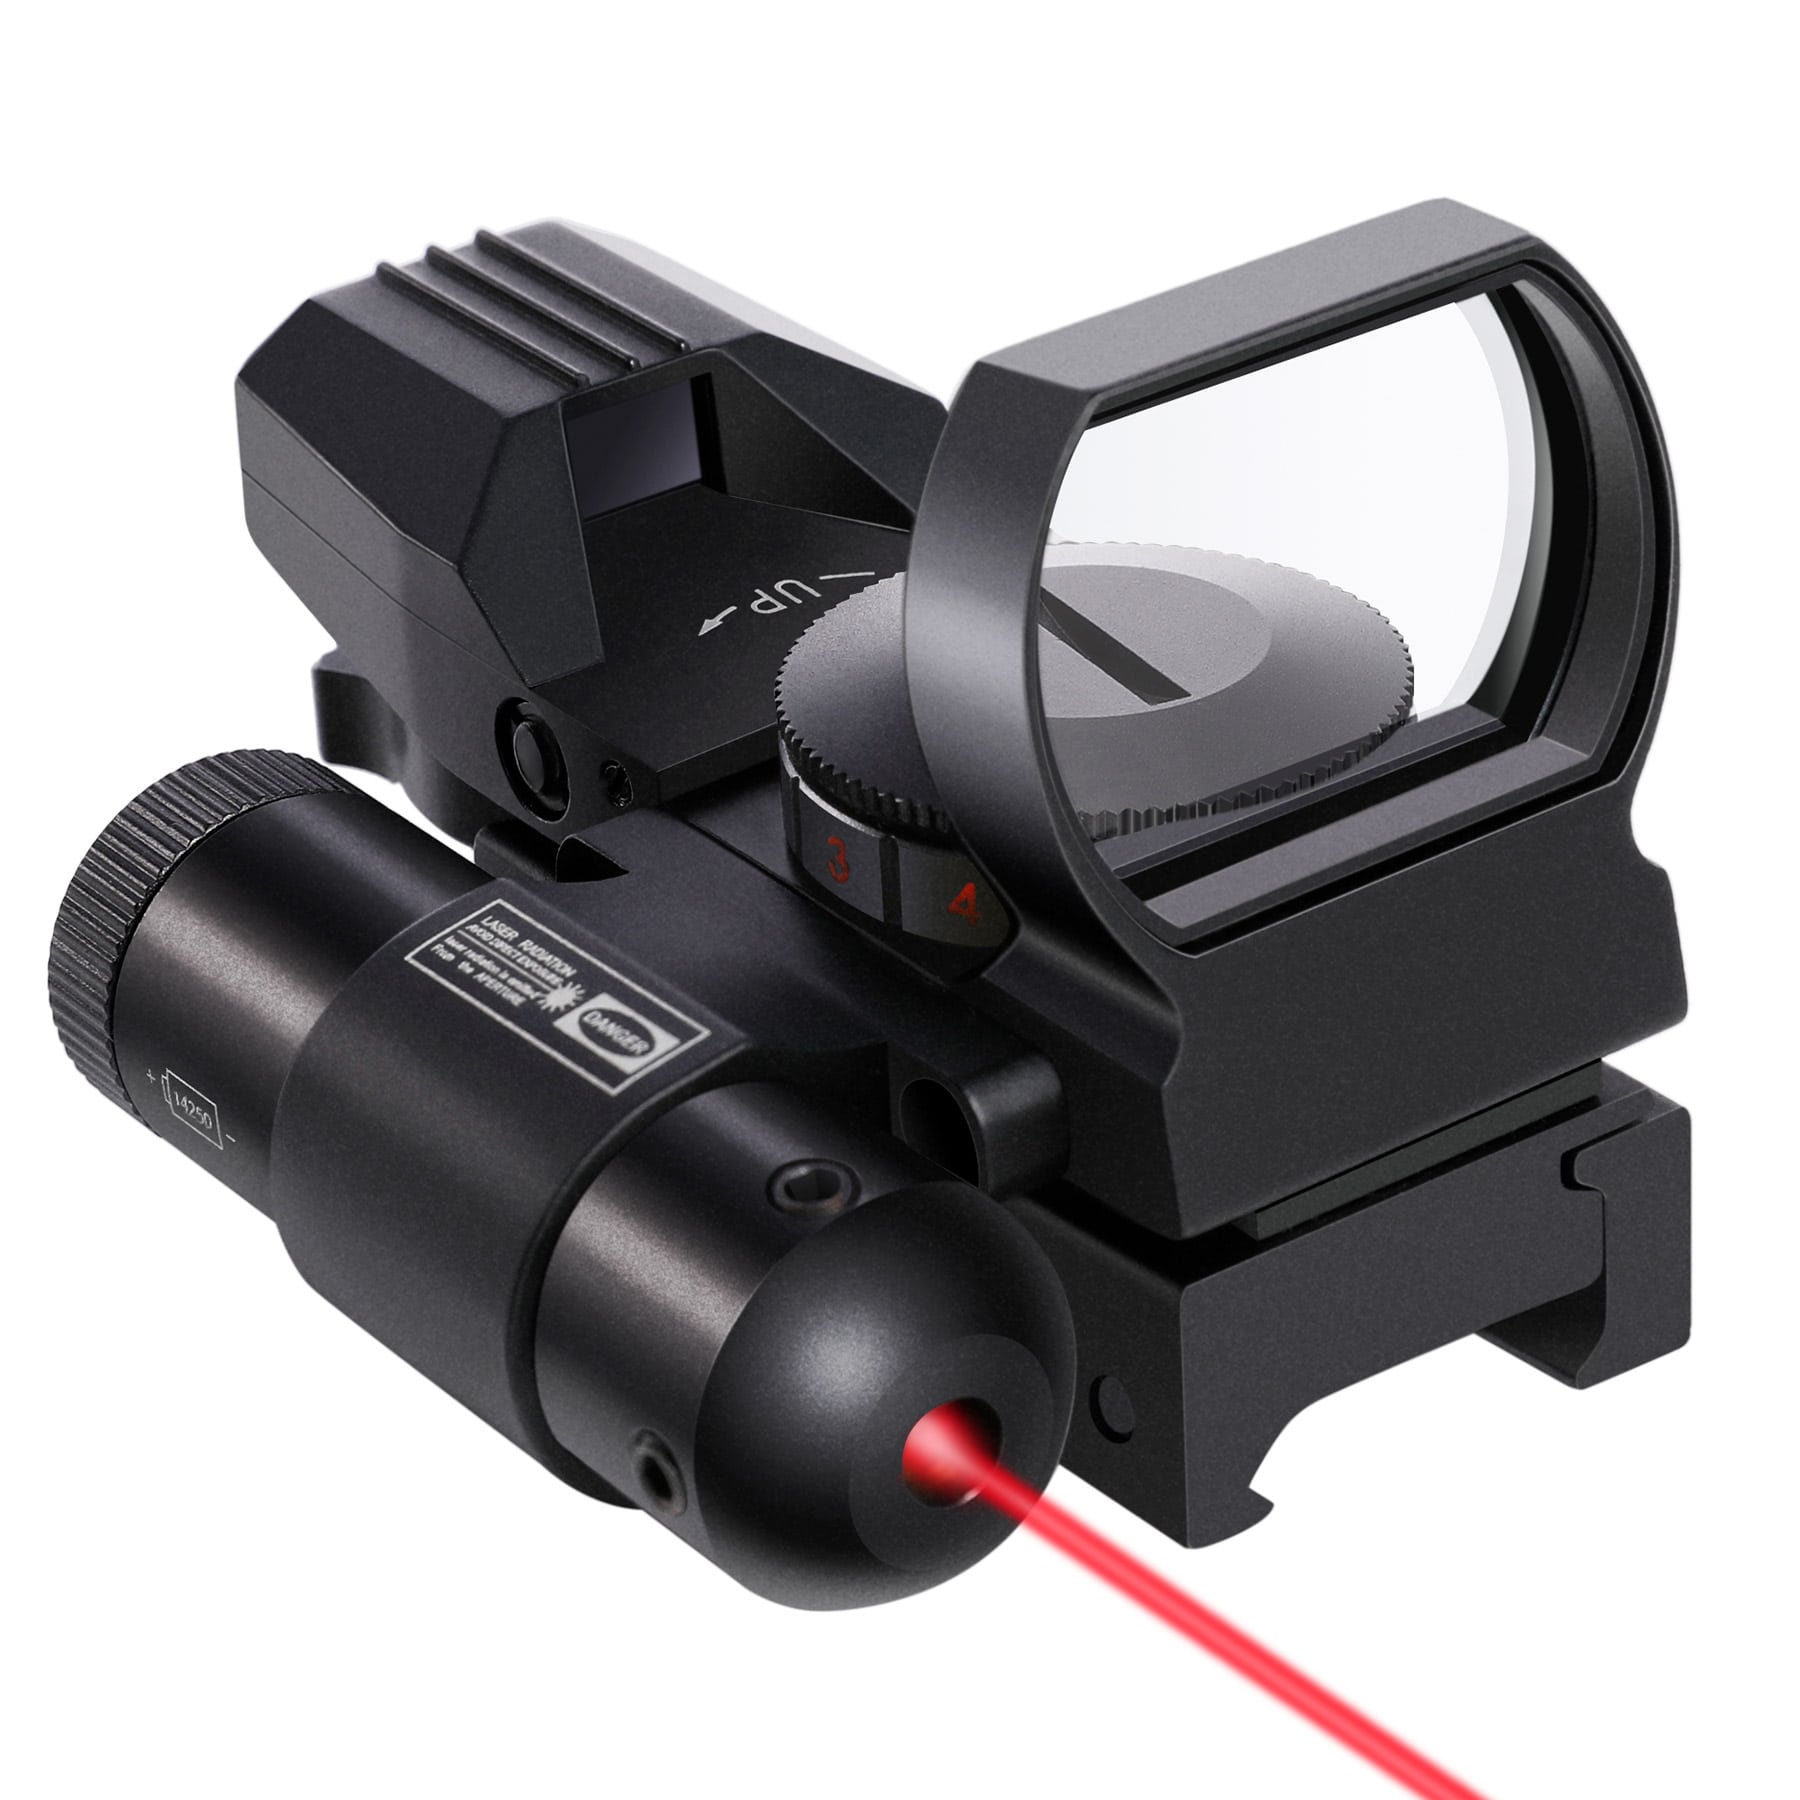 Red Dot Sight with Integrated Laser Sight, Reflex Sight Optics 4 Pattern Reticle, 2MOA Red & Green Dot 5 Brightness Levels with Laser, Red, Green